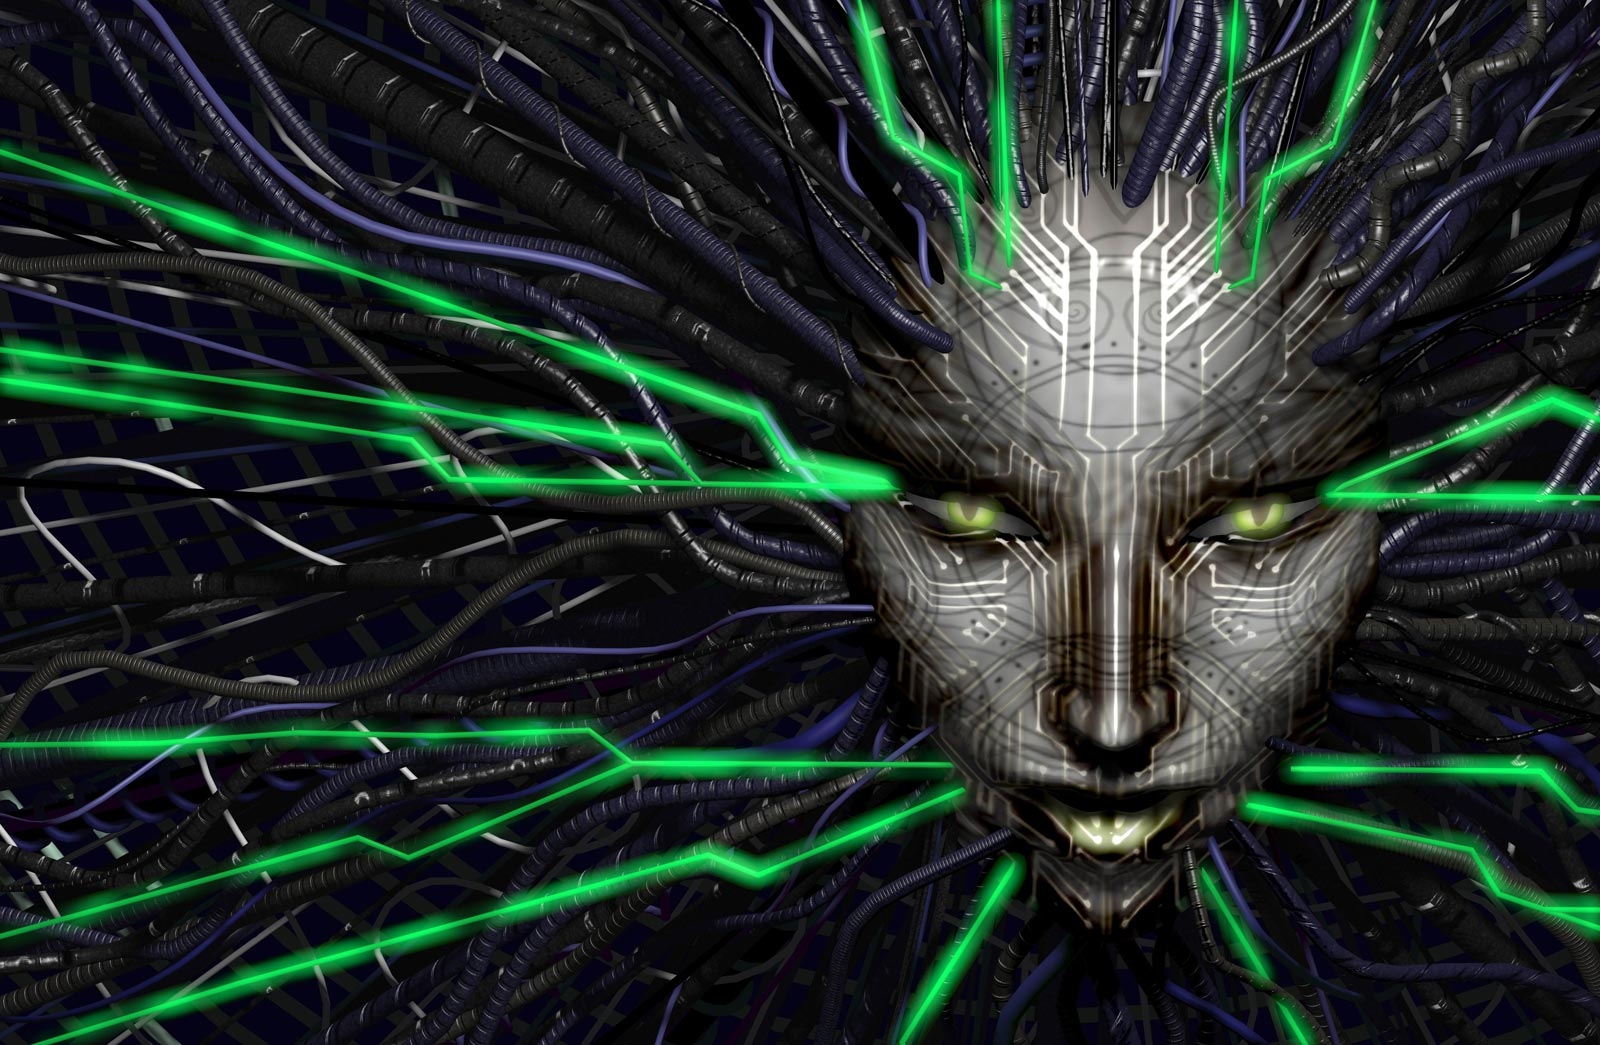 New Footage Revealed for “System Shock” Remaster - Proejct Kickstarter Will Launch Shortly